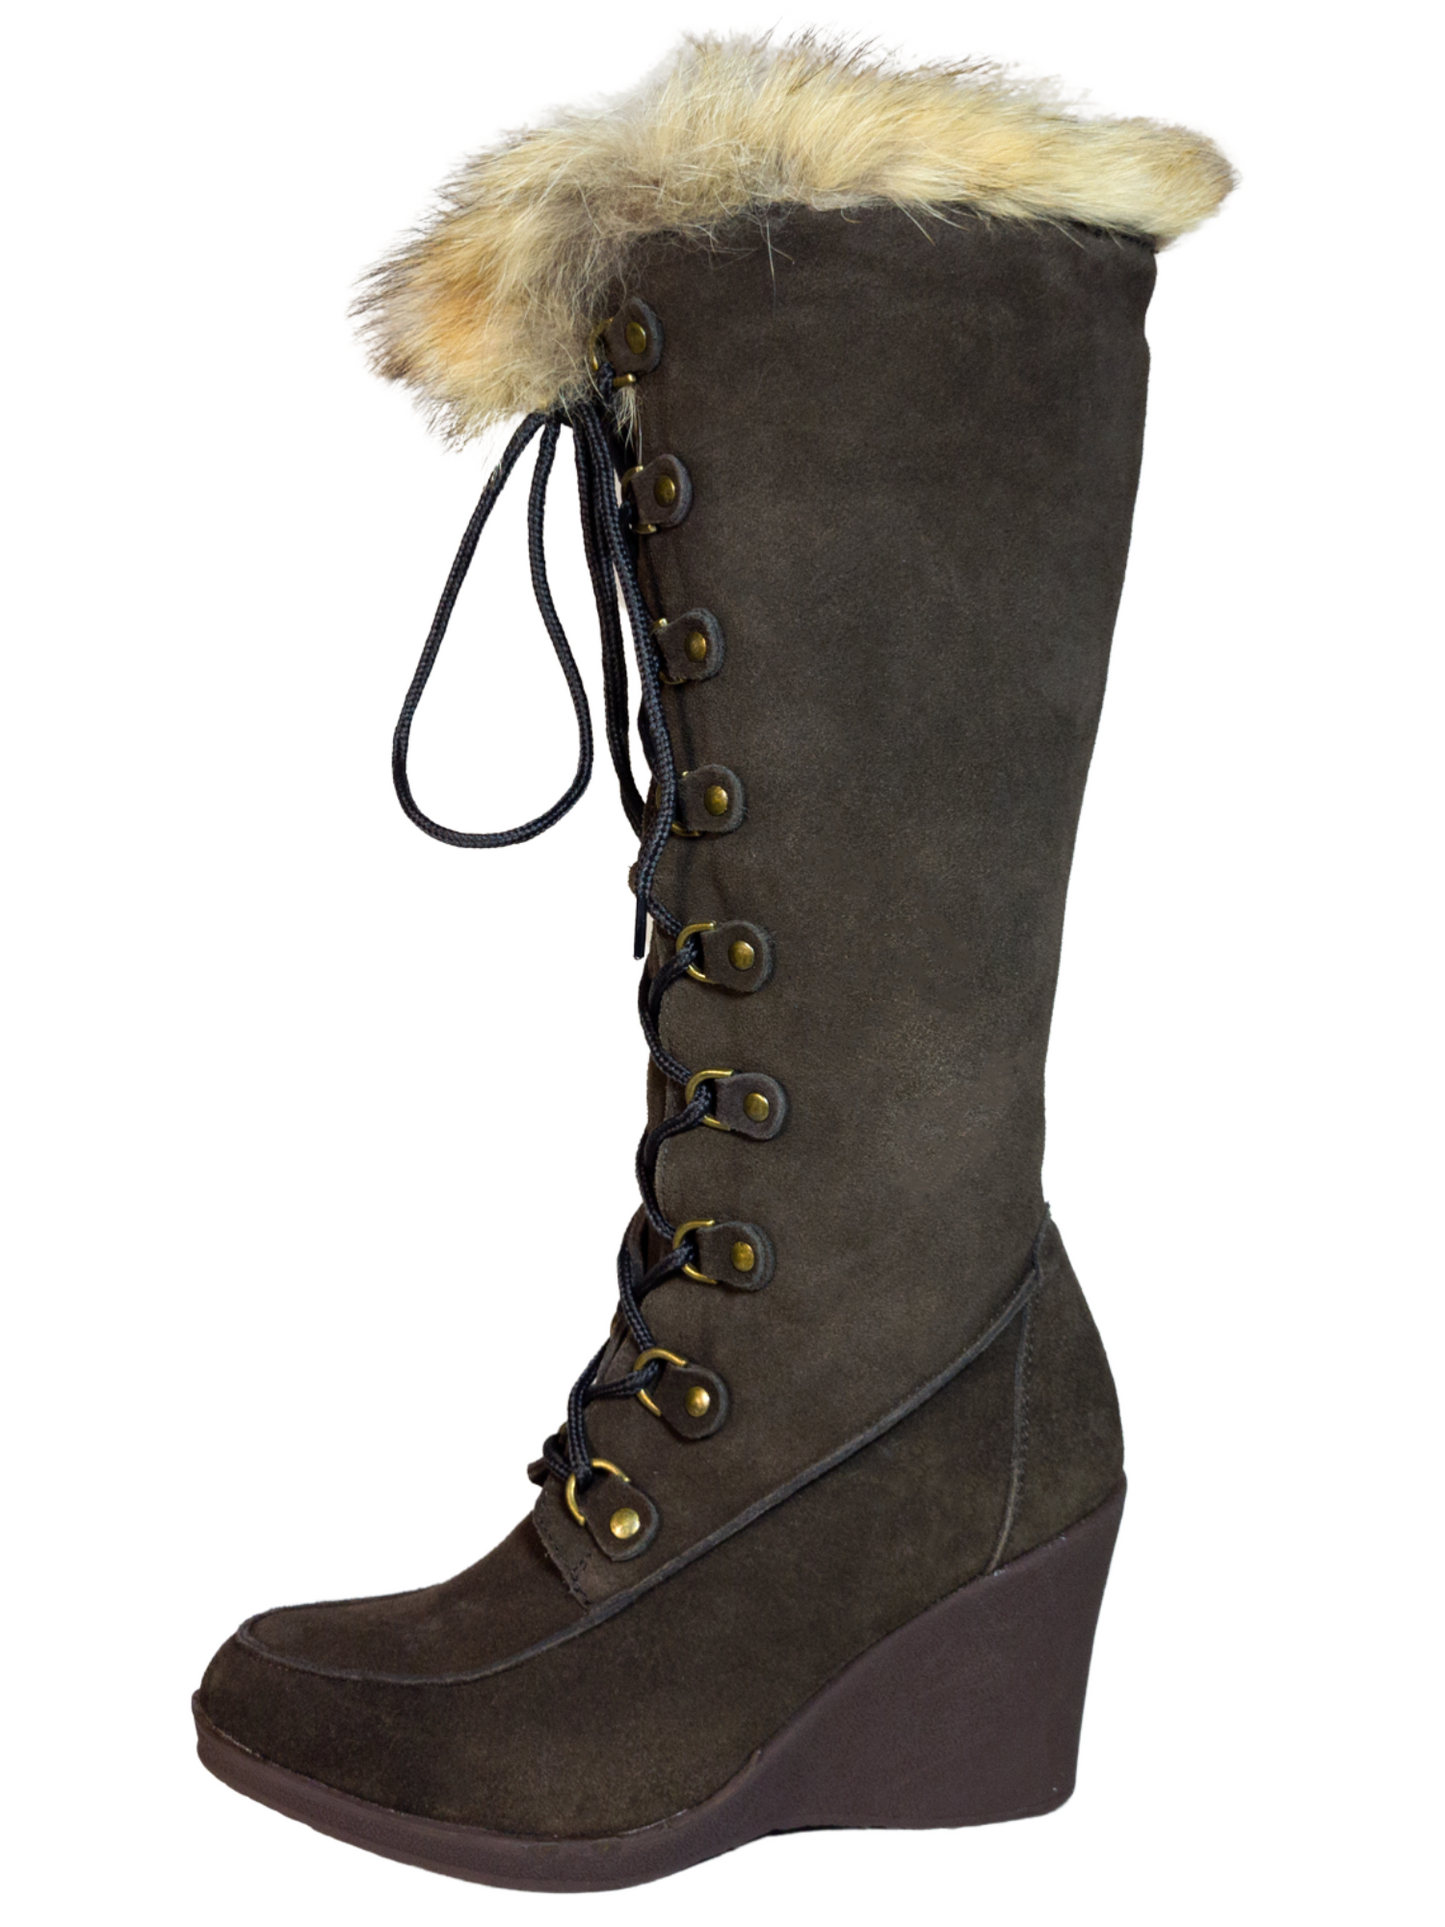 Suede Leather / Fox Hair Wedge Winter Boots for Women 'Bearpaw' - ID: 7133